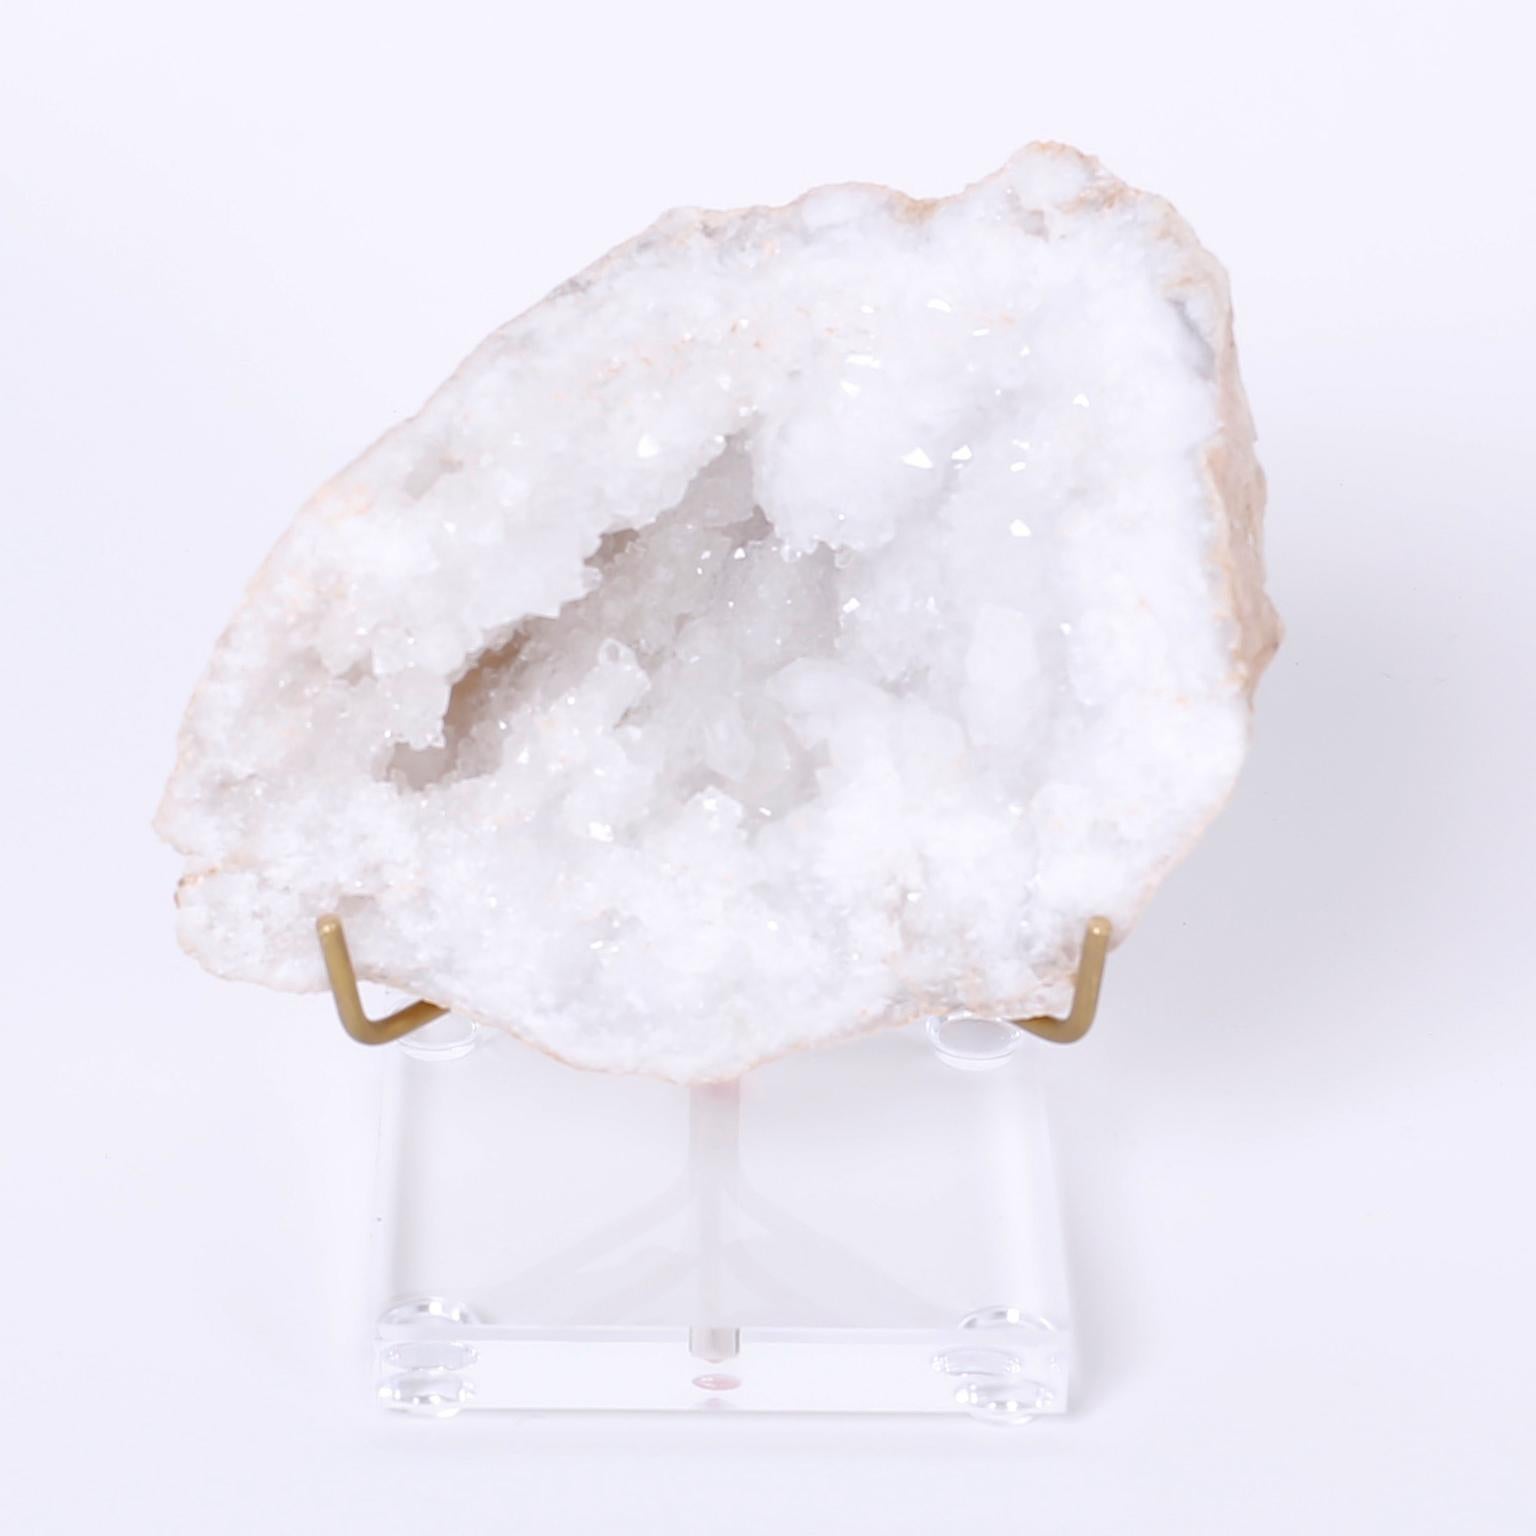 Quartz geode split into two specimens presented on lucite and brass
stands to enhance the alluring geological spectacle. Priced Individually.

Left:   H: 5 W: 5 D: 4  $375.00
Right: H: 7 W: 6 D: 6  $450.00